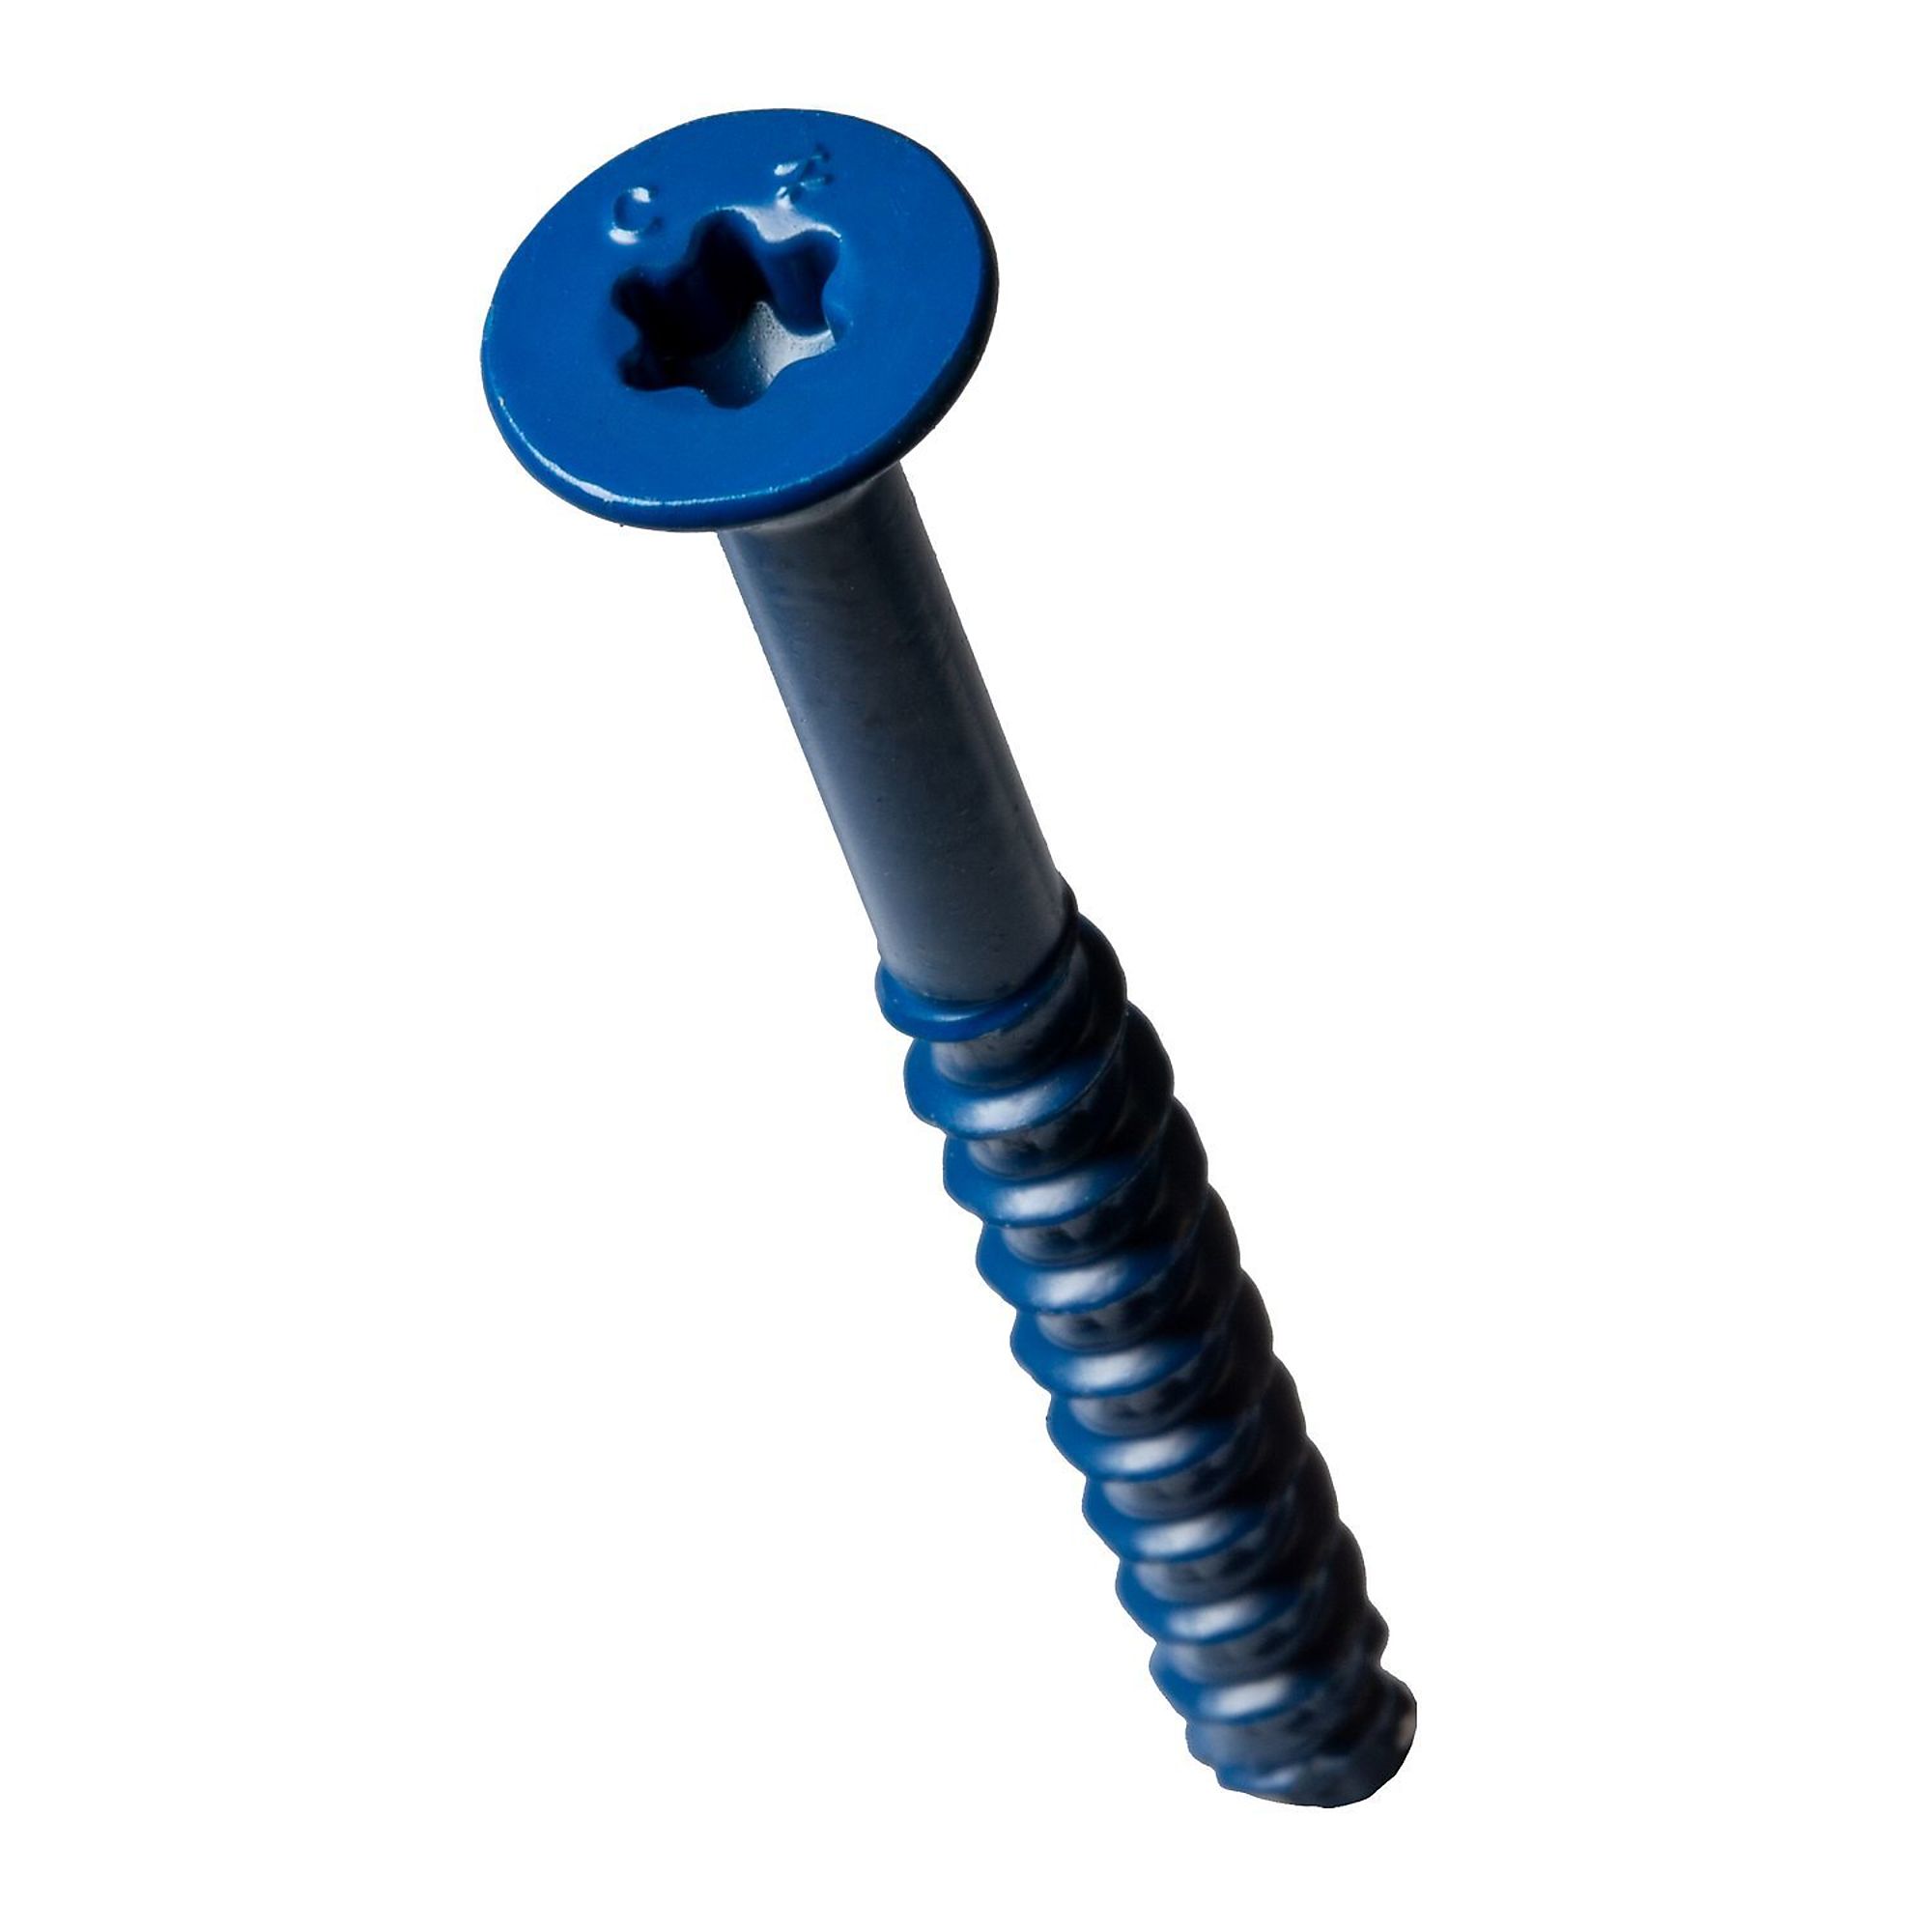 SIMPSON Strong-Tie, 1/4Inch x 1-1/4Inch Flat-Head Concrete Screw, Included (qty.) 100, Model TNT25114TF